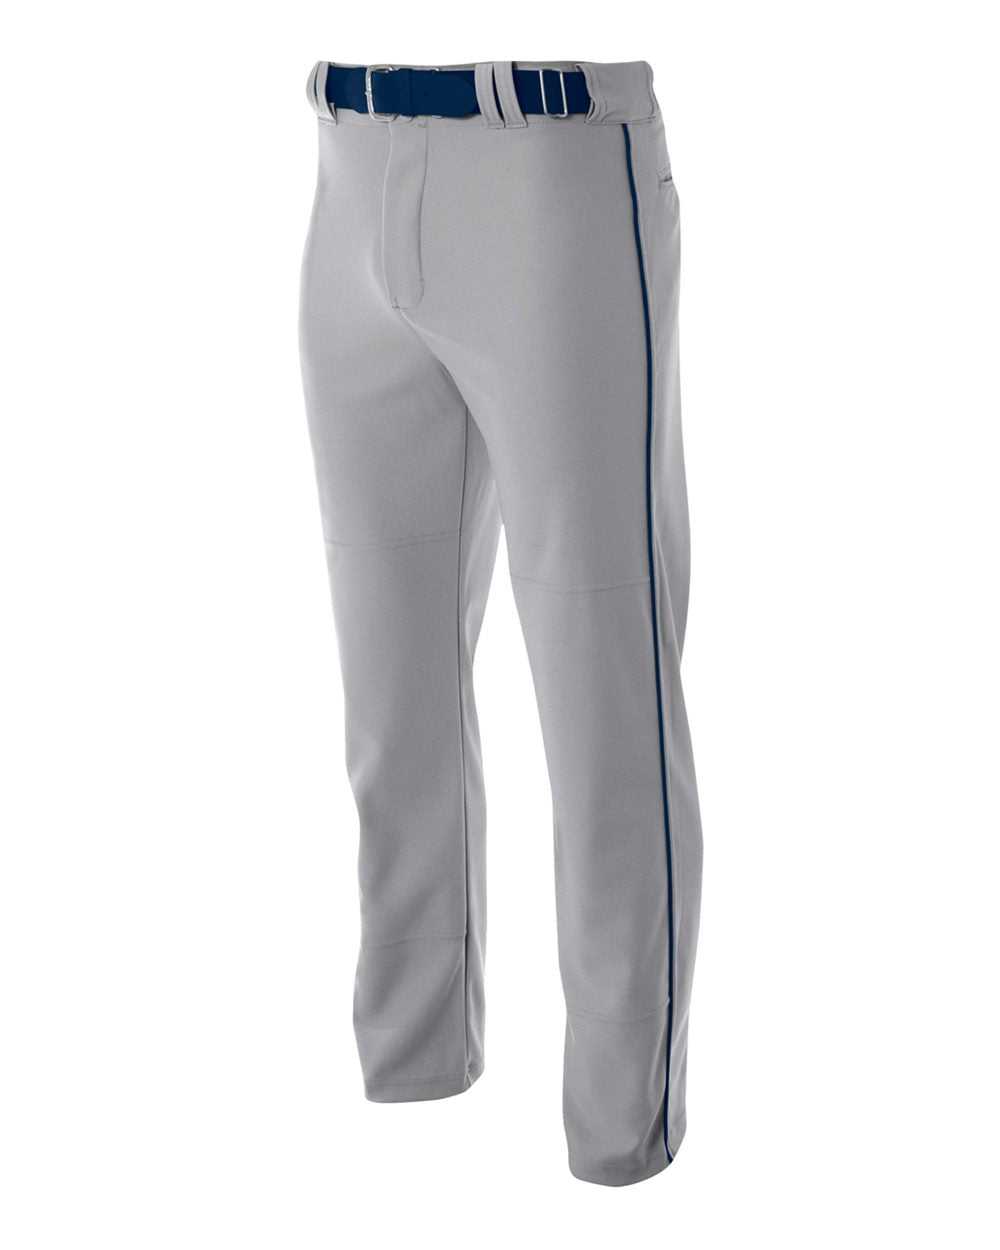 A4 NB6162 Youth Pro Style Open Bottom Baggy Cut Baseball Pant - Gray Navy - HIT a Double